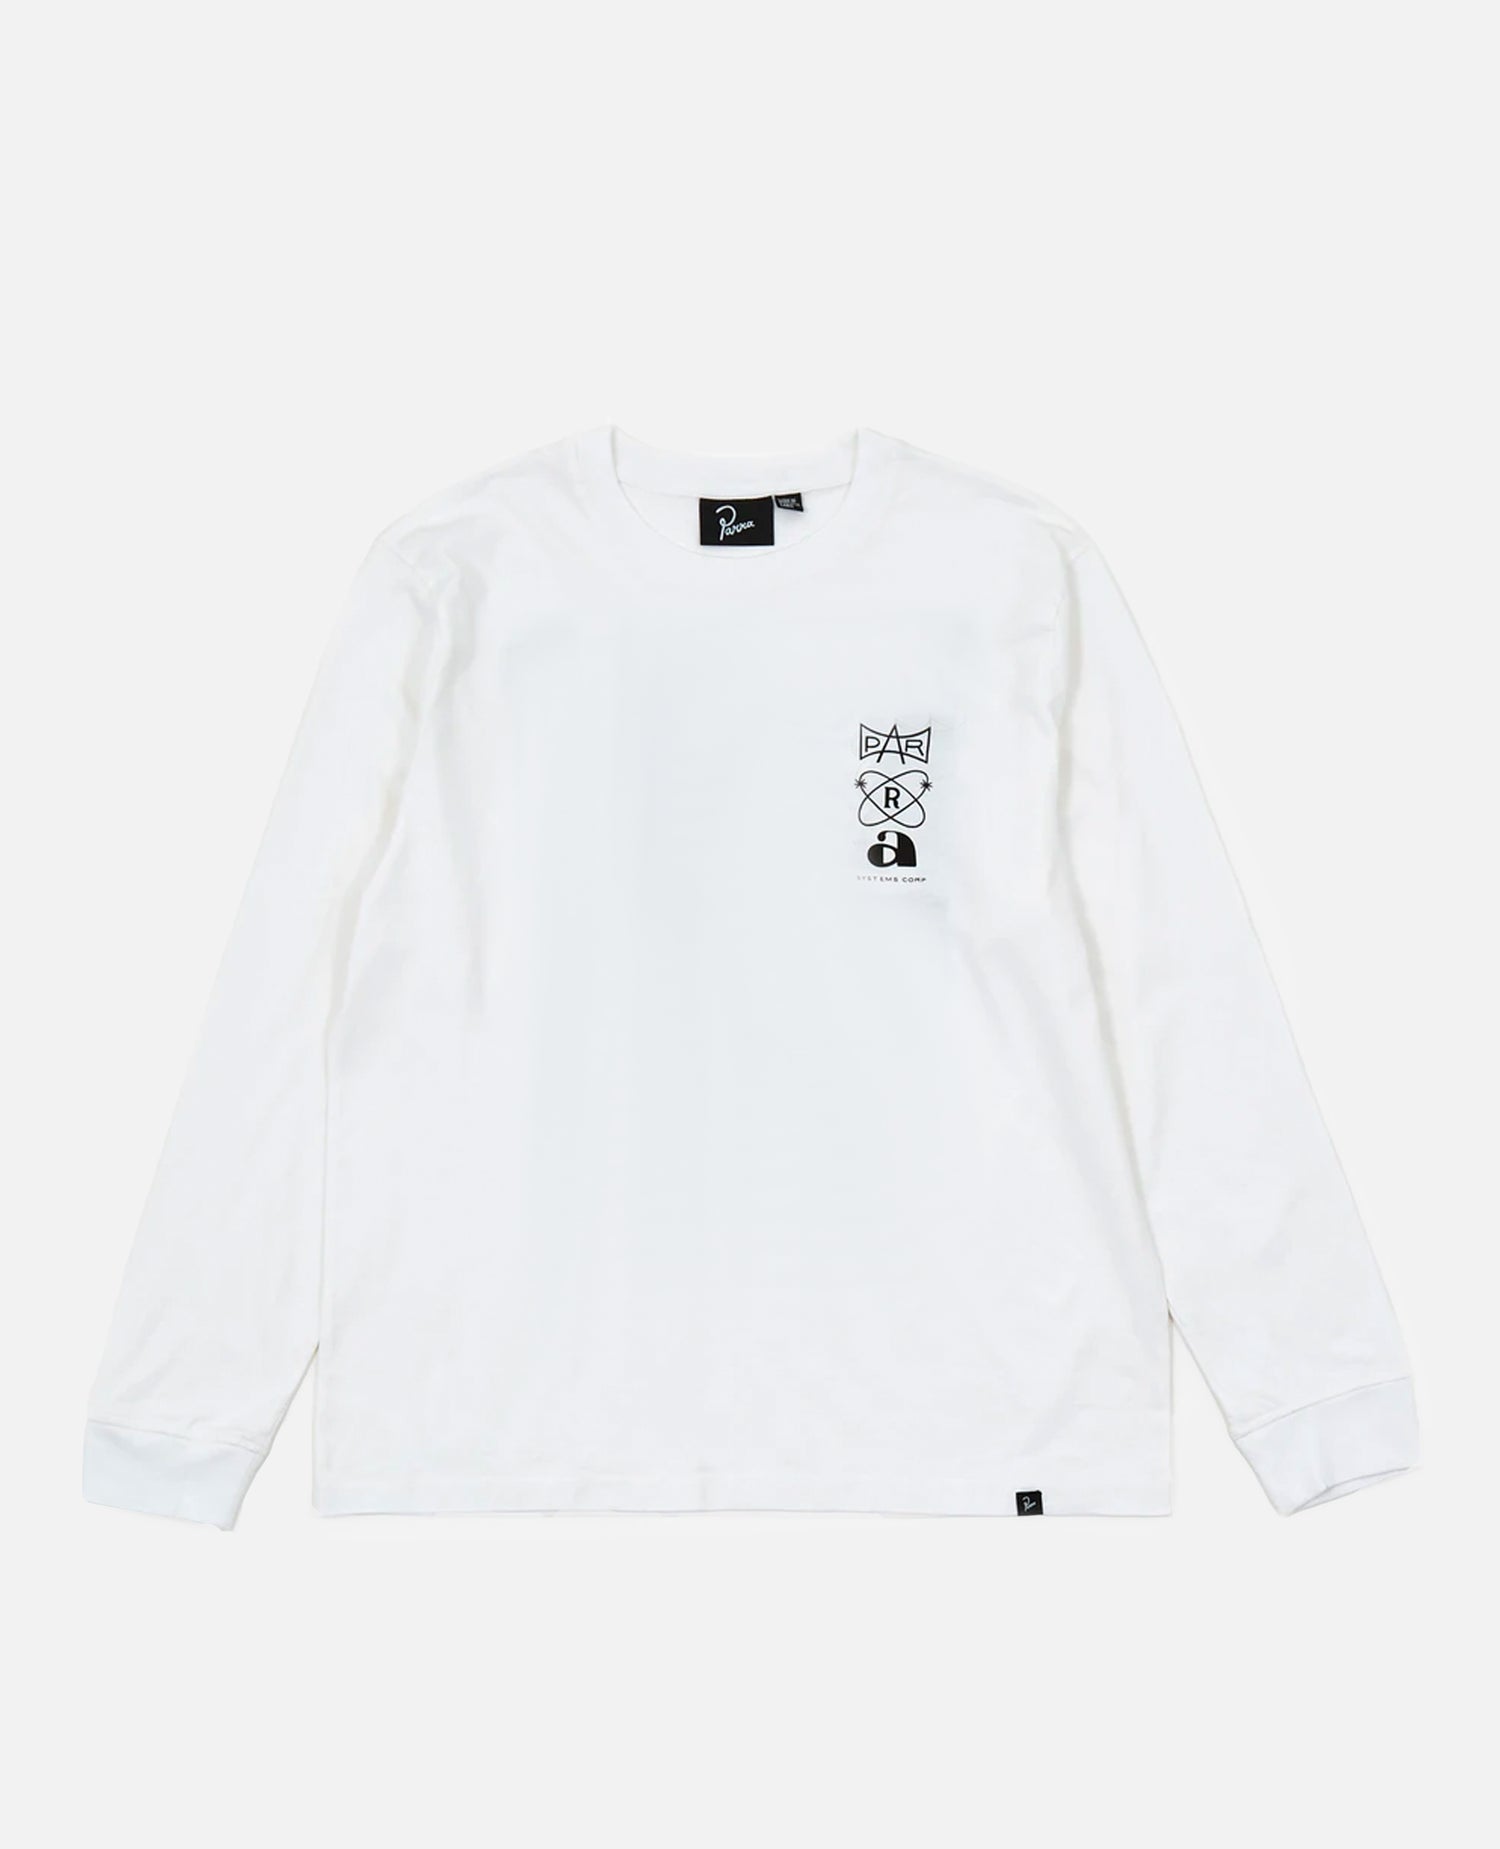 byParra Rest Day Longsleeve T-Shirt (White)